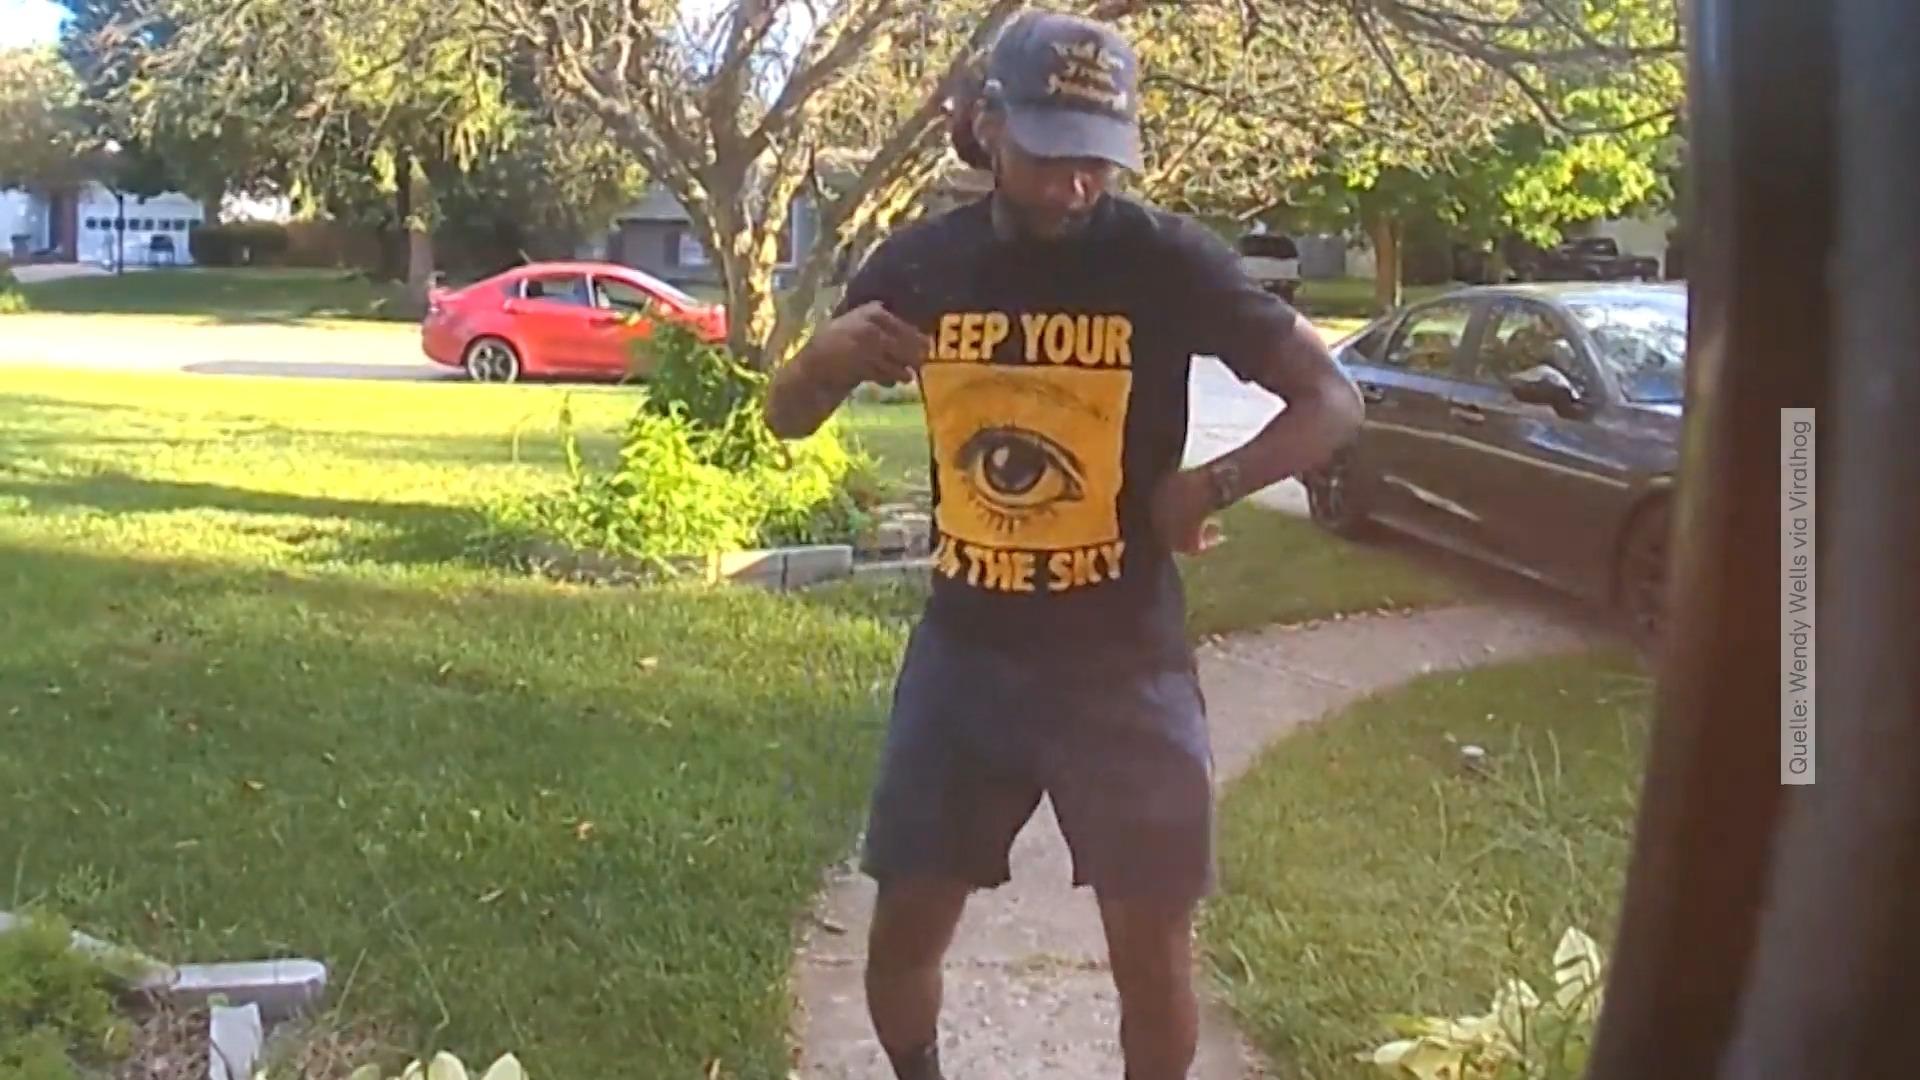 USA: The Postman has been filmed - and he's doing a dance show that moves!